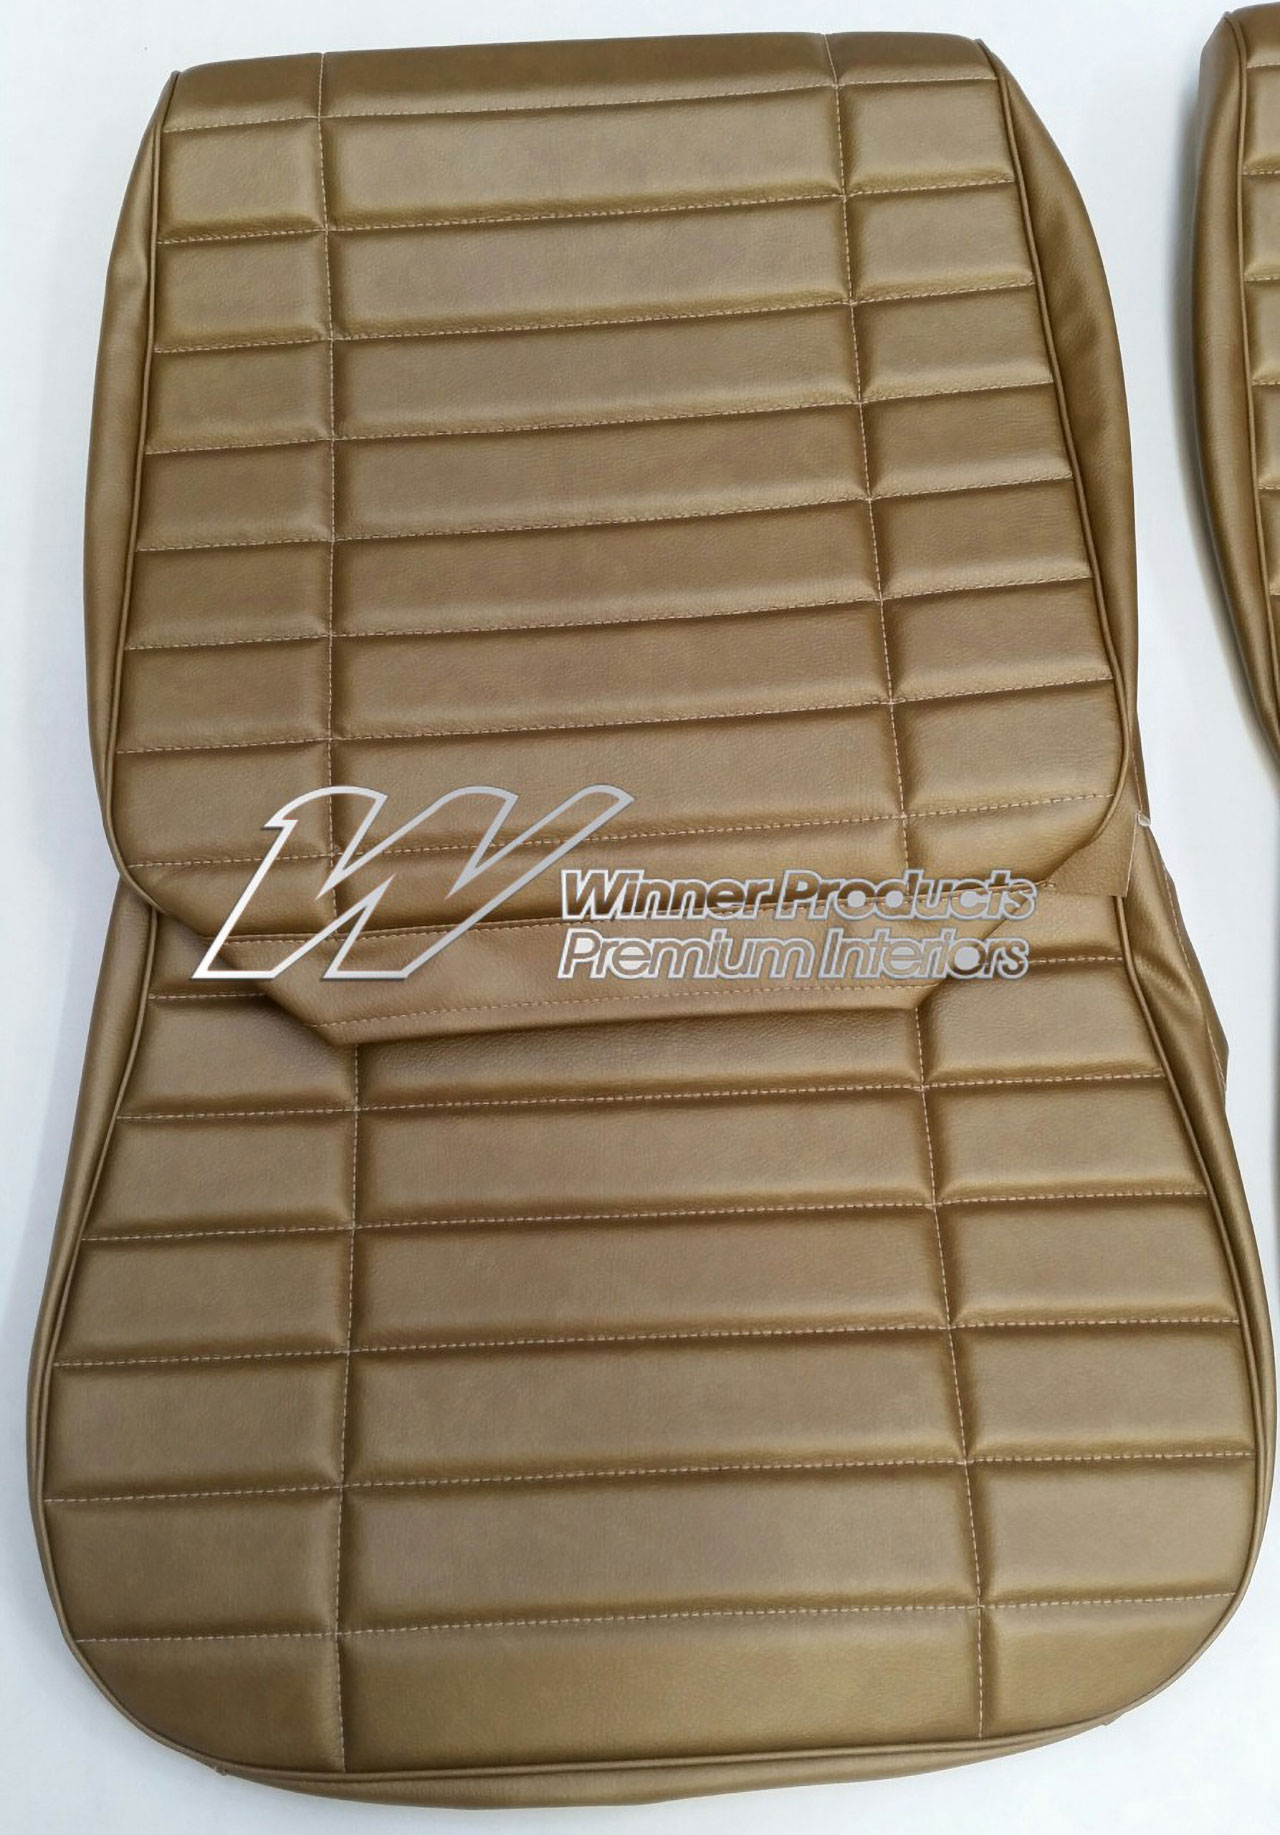 Holden Monaro HG Monaro Coupe 11X Antique Gold Seat Covers (Image 3 of 4)